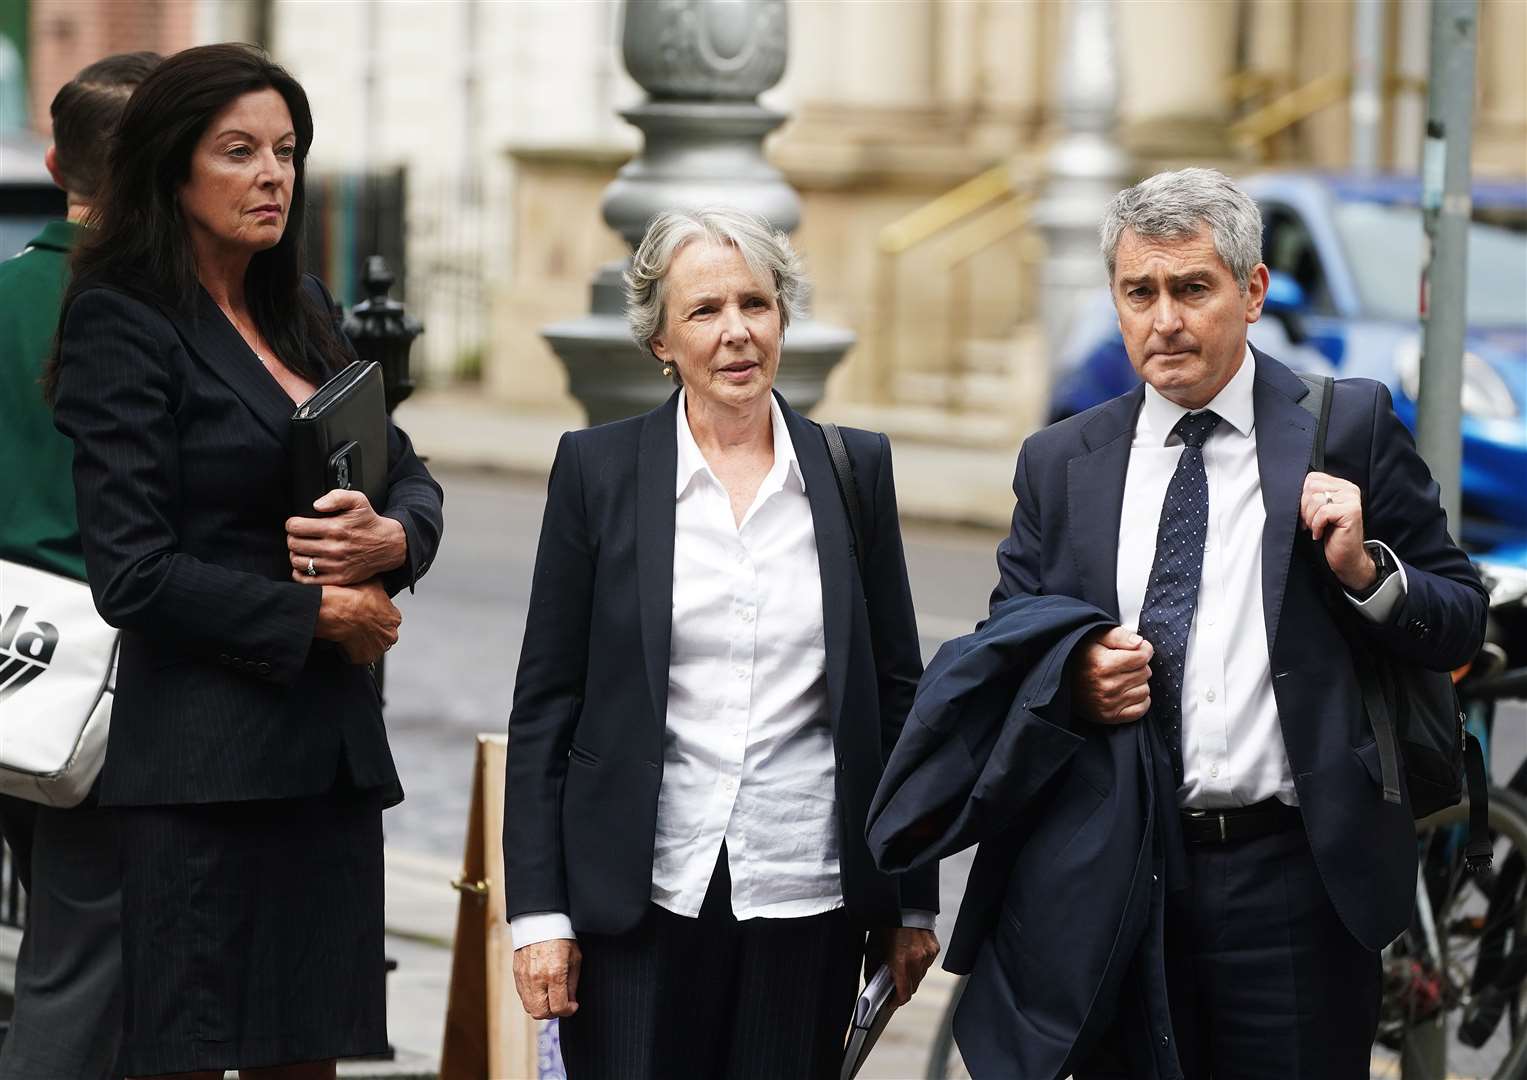 RTE chairperson of the board Siun Ni Raghallaigh (centre), board member Anne O’Leary (left) and staff representative to the board Robert Shortt (right) arriving at Leinster House (Brian Lawless/PA)